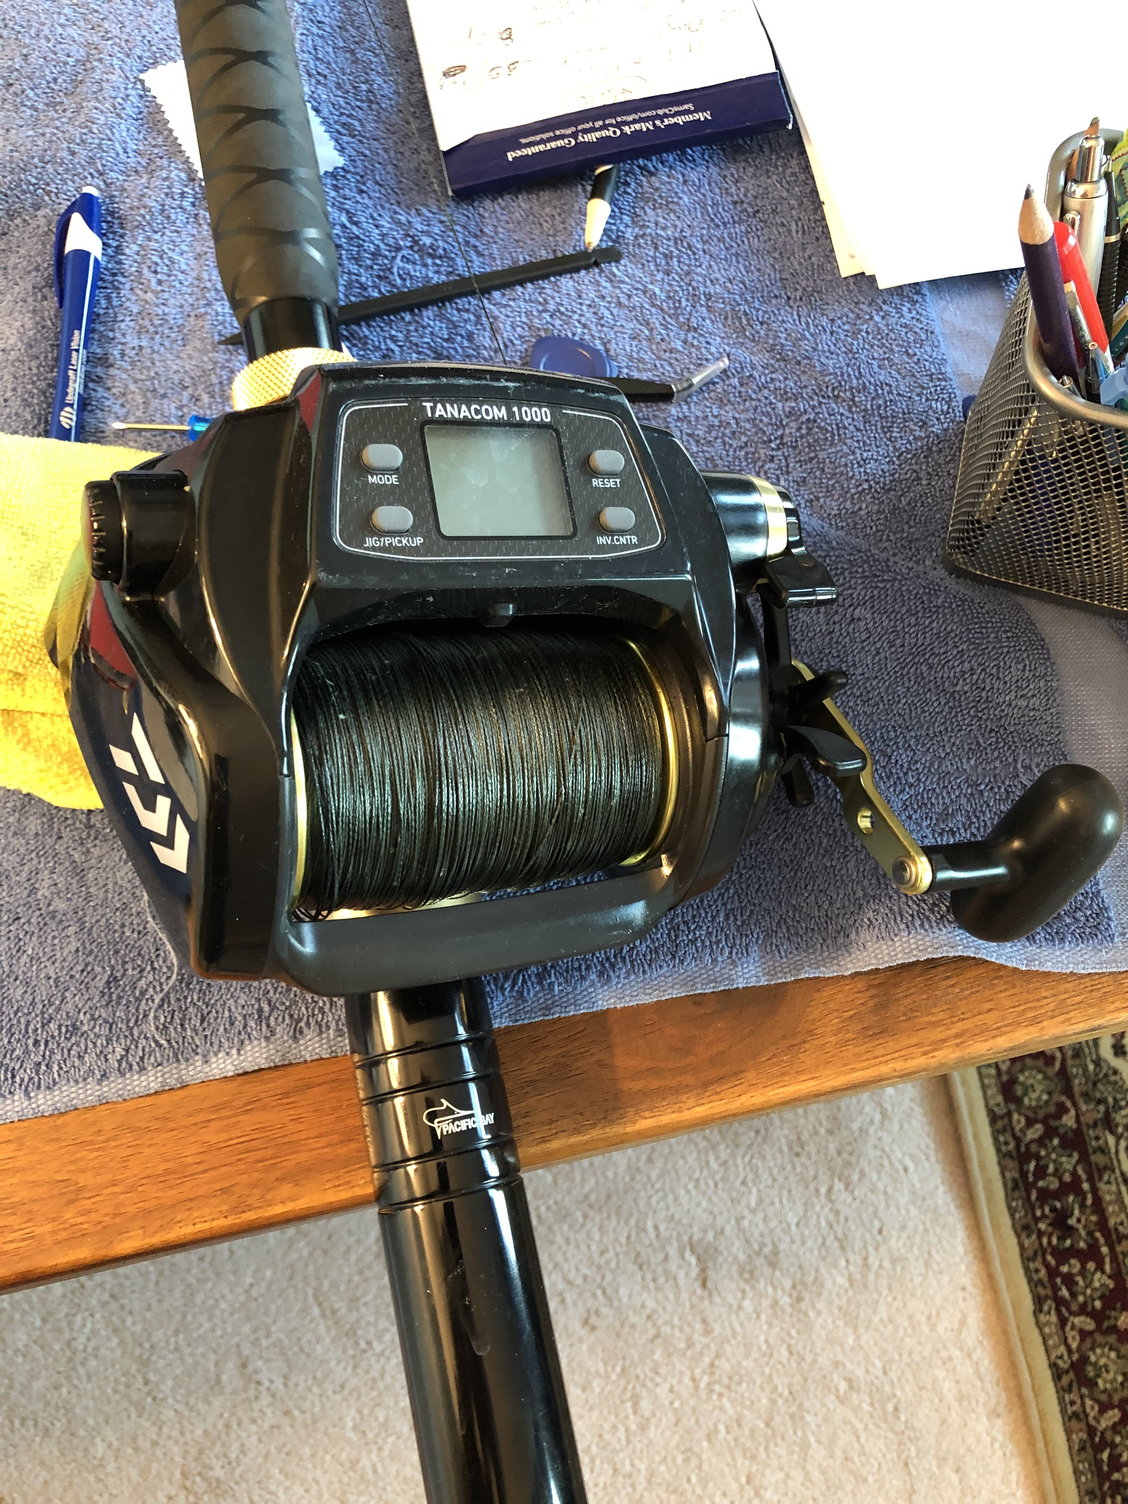 Electric reels - The Hull Truth - Boating and Fishing Forum